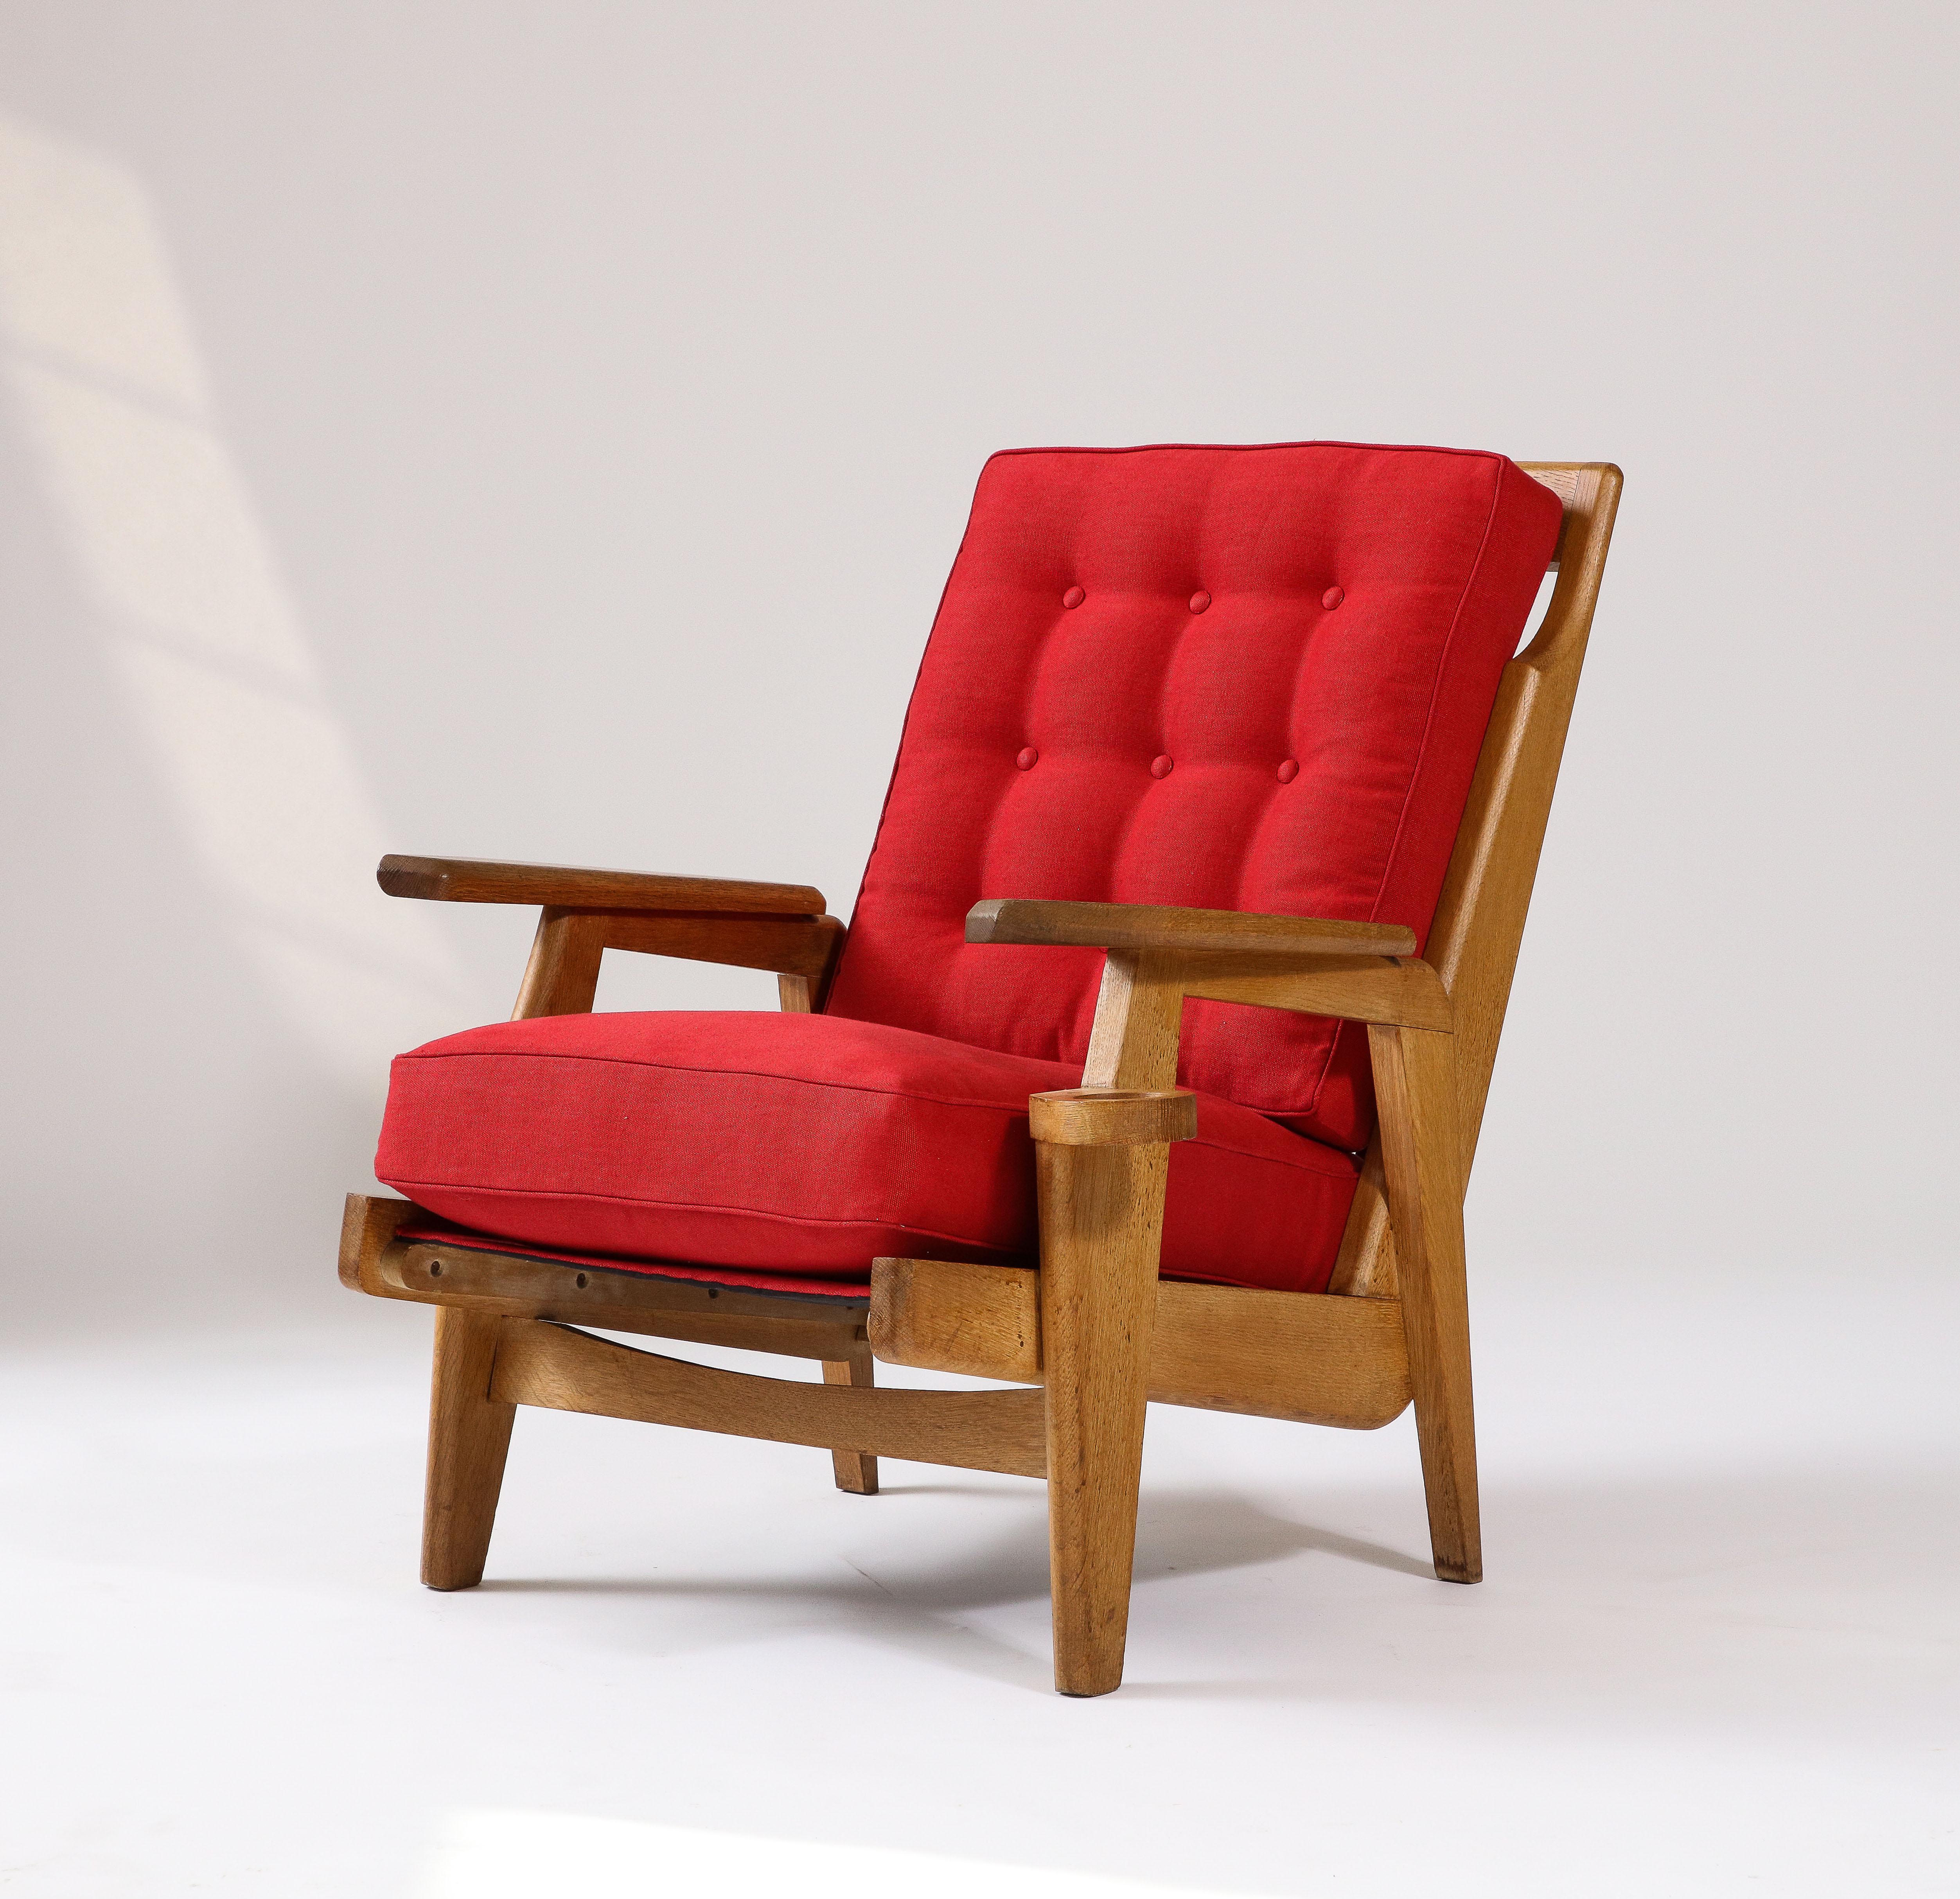 20th Century Oak and Upholstery Armchair by Guillerme et Chambron, France, c. 1960